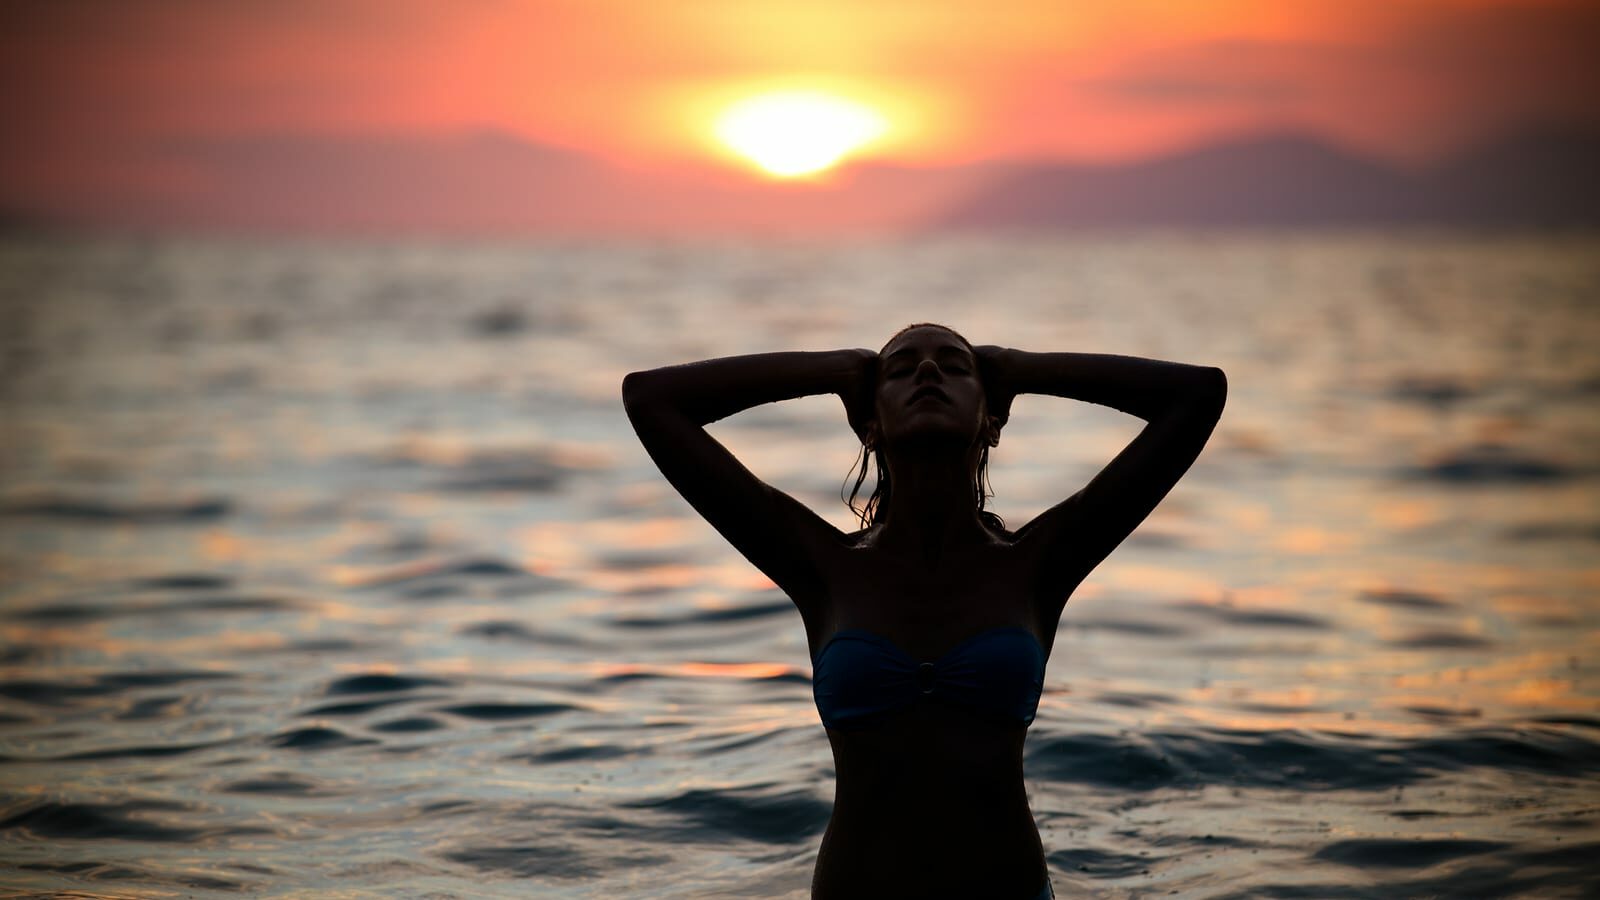 Gorgeous sexy fit woman silhouette swimming in sunset.Free happy woman enjoying sunset. Beautiful woman in water embracing the golden sunshine glow of sunset, enjoying peace, serenity in nature.